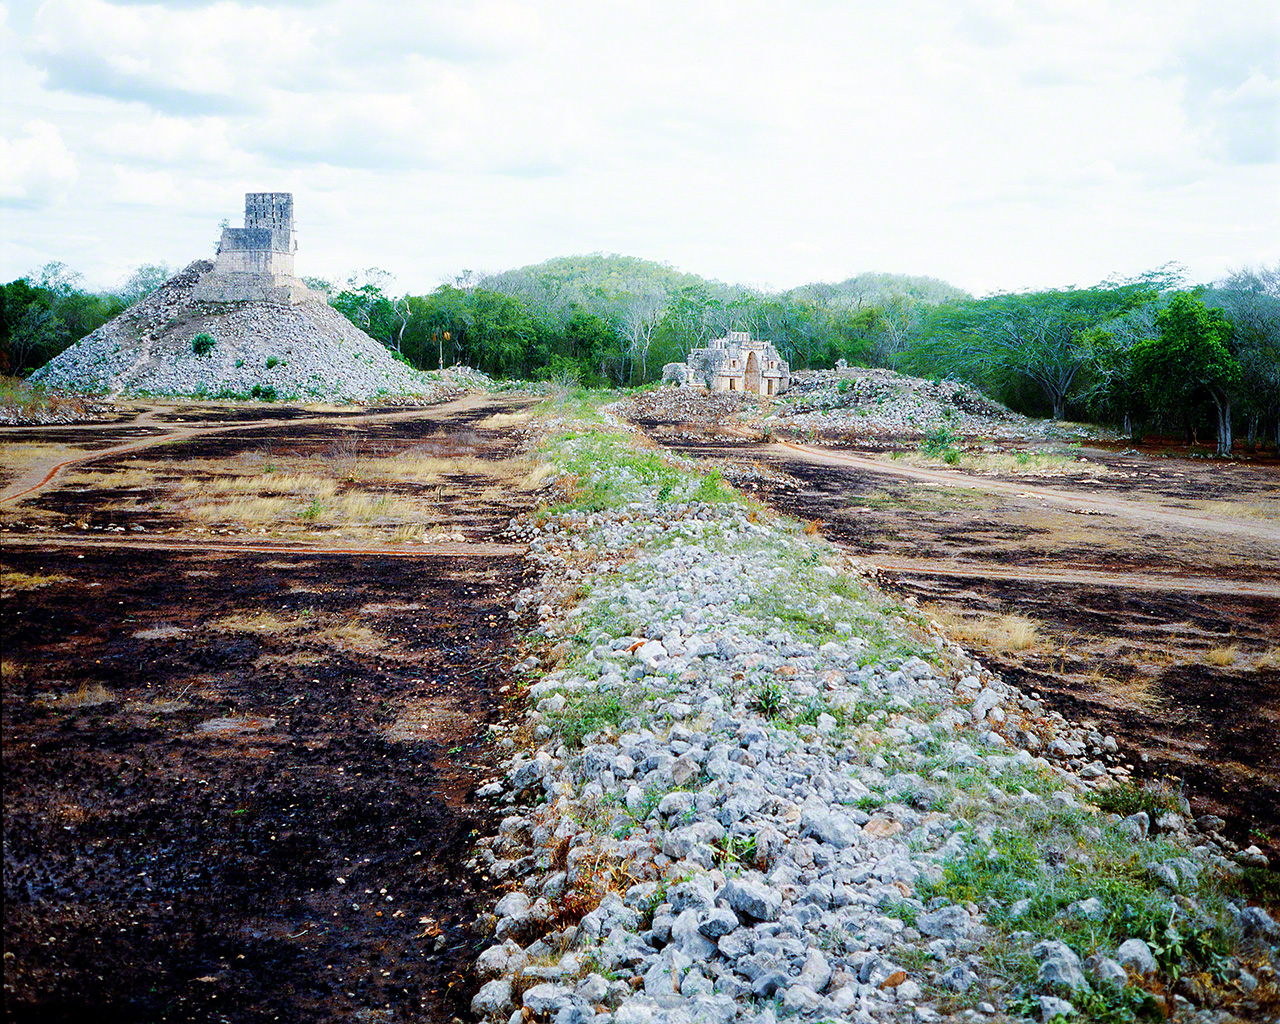 Photograph taken by Haga in 1981 when he was involved in an archaeological dig of a paved road at a Mayan site in Mexico. His experiences here led to his becoming a photographer.